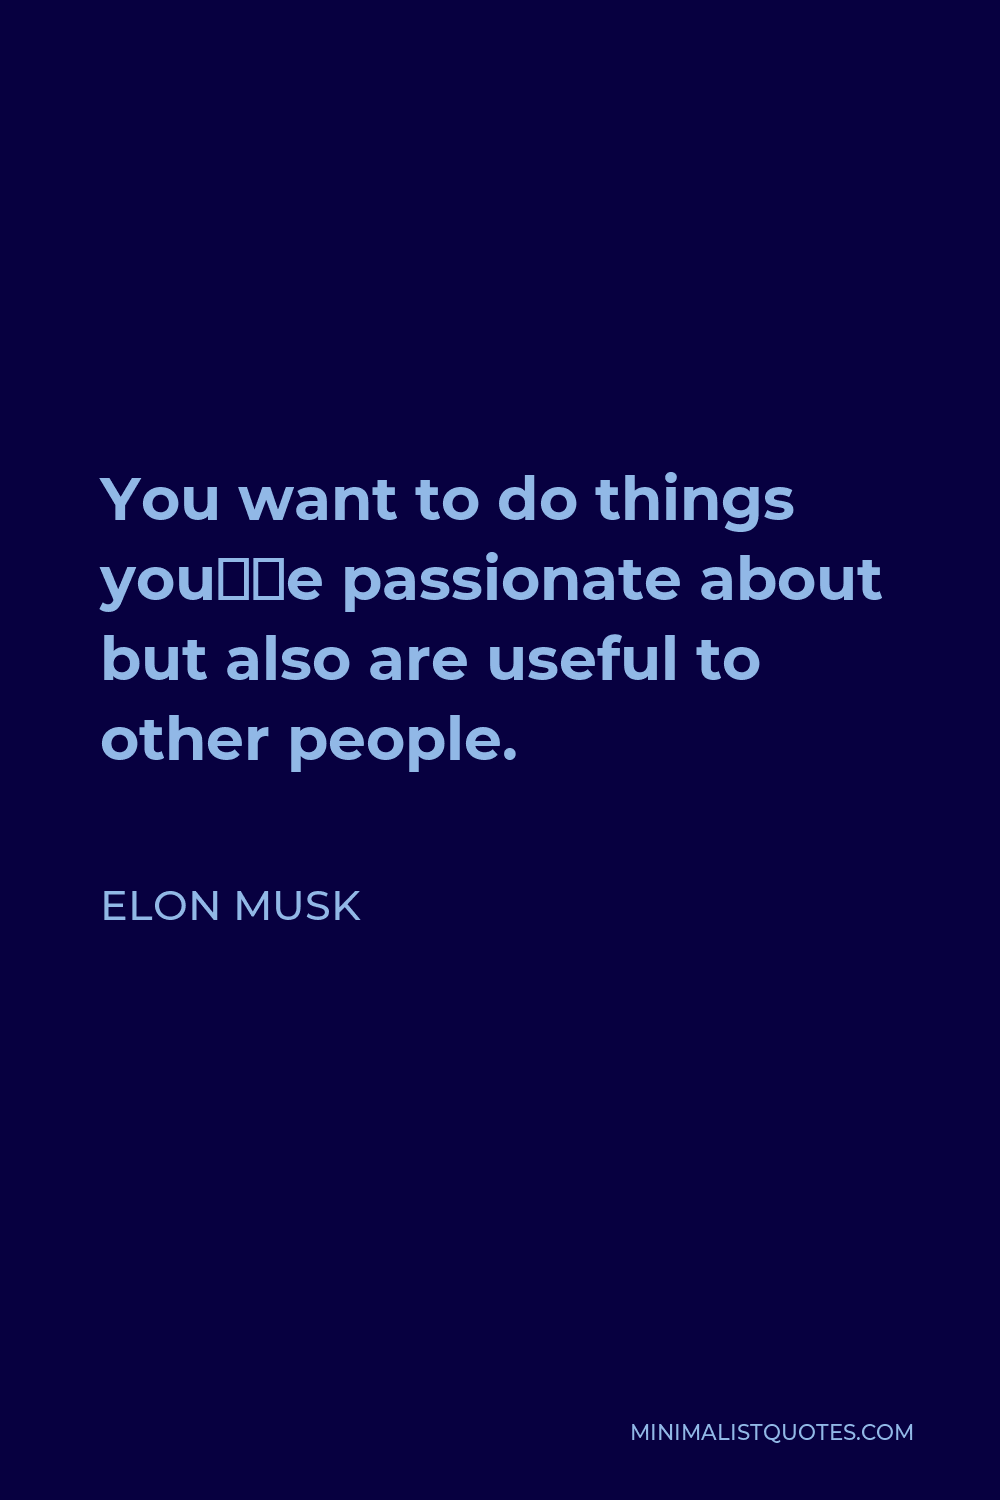 Elon Musk Quote - You want to do things you’re passionate about but also are useful to other people.